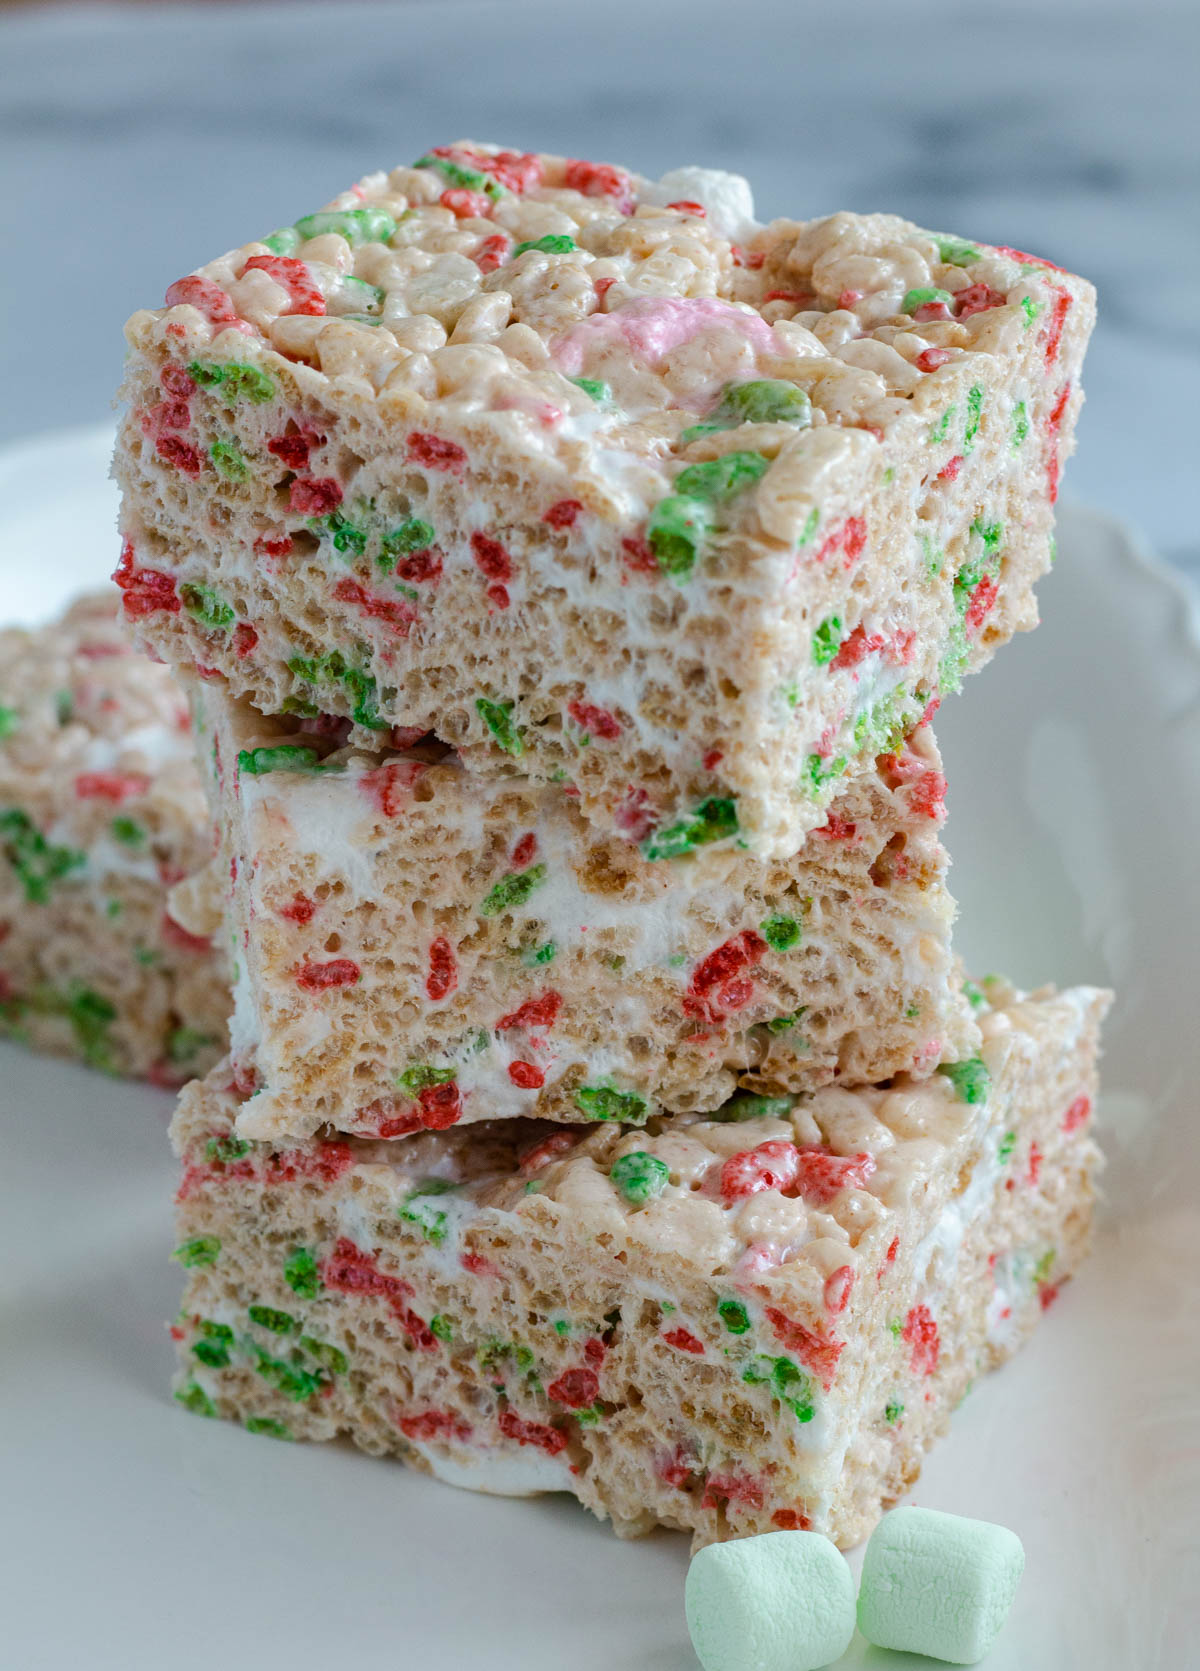 Three Rice Krispie squares sitting on top of each other on a white plate.  Two green marshmallows sit in front of them.